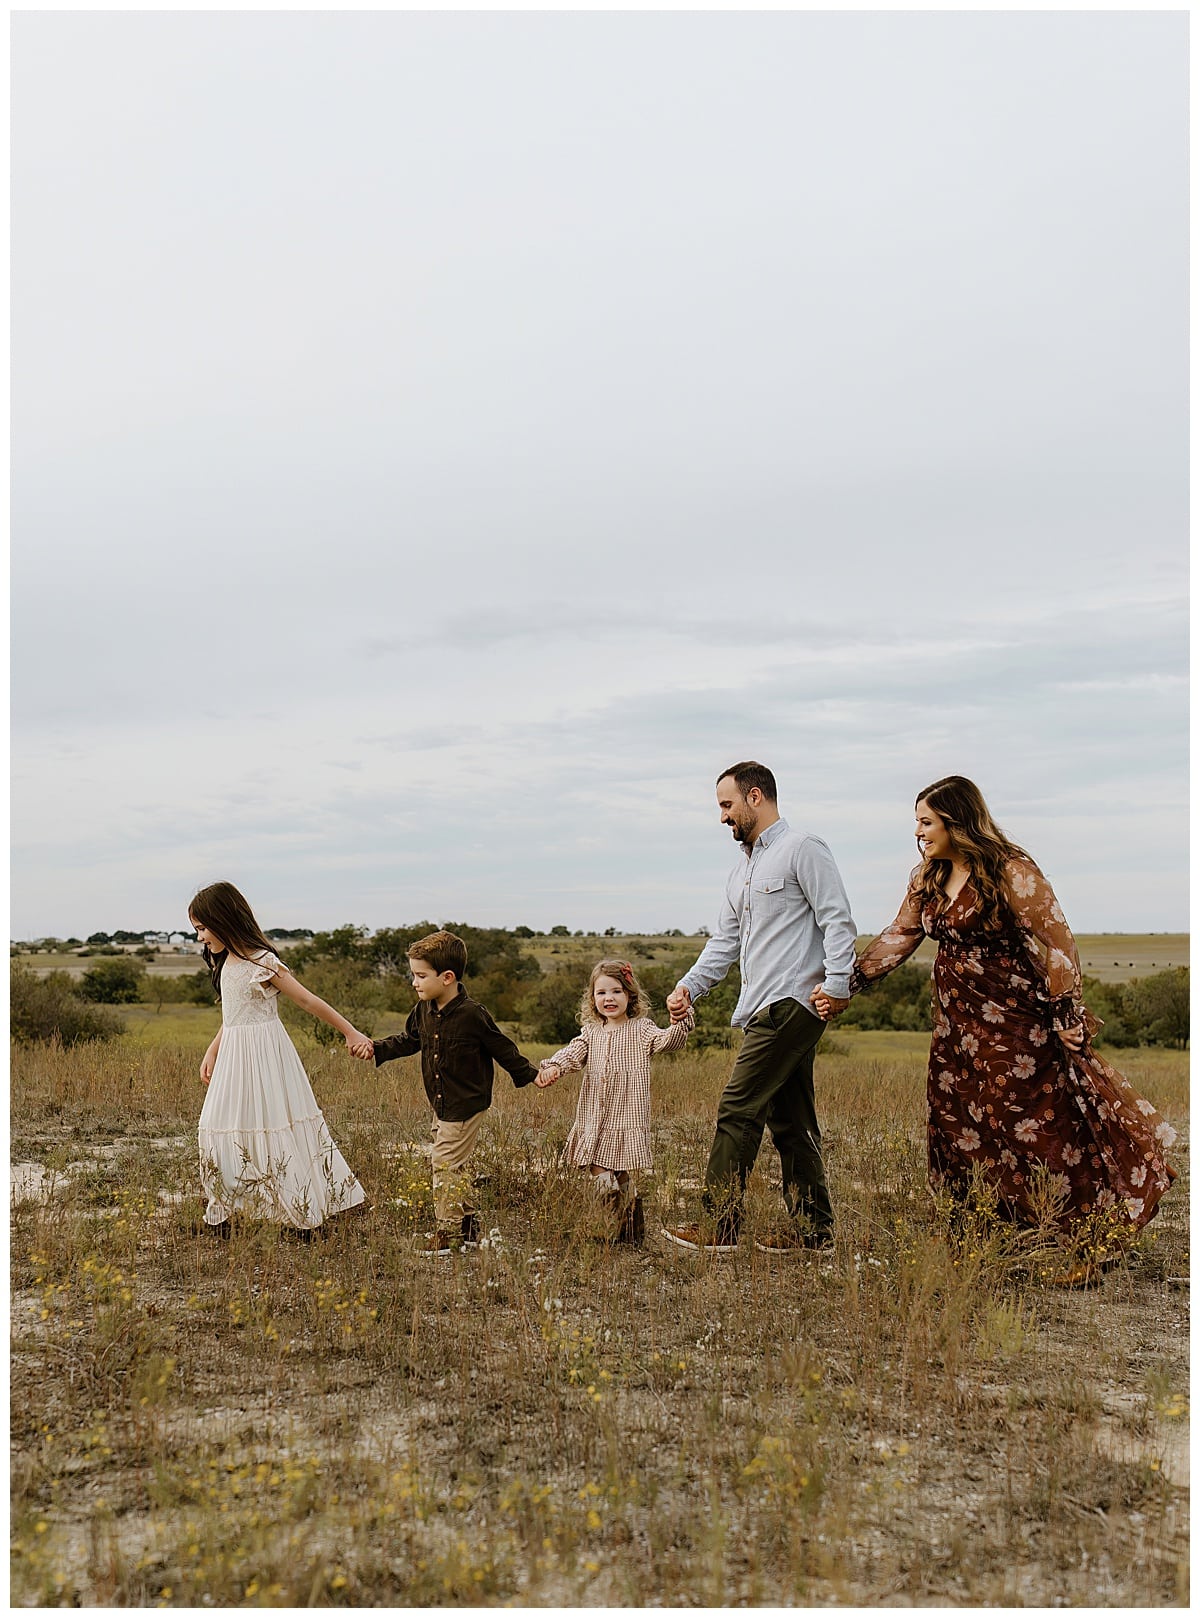 Parents and children walk together for Austin Lifestyle Photographer